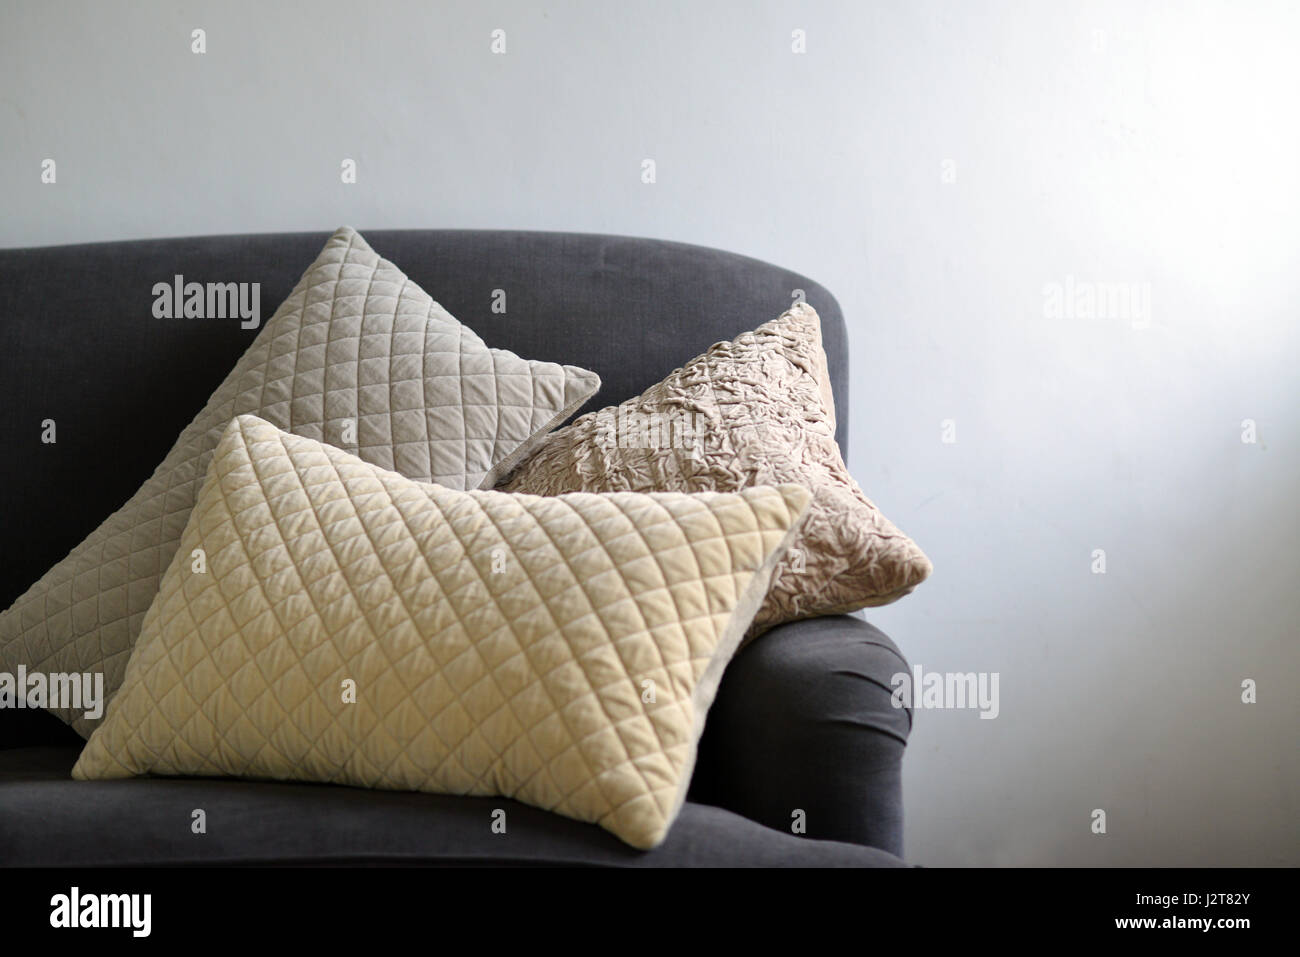 Textured cushions on a couch Stock Photo